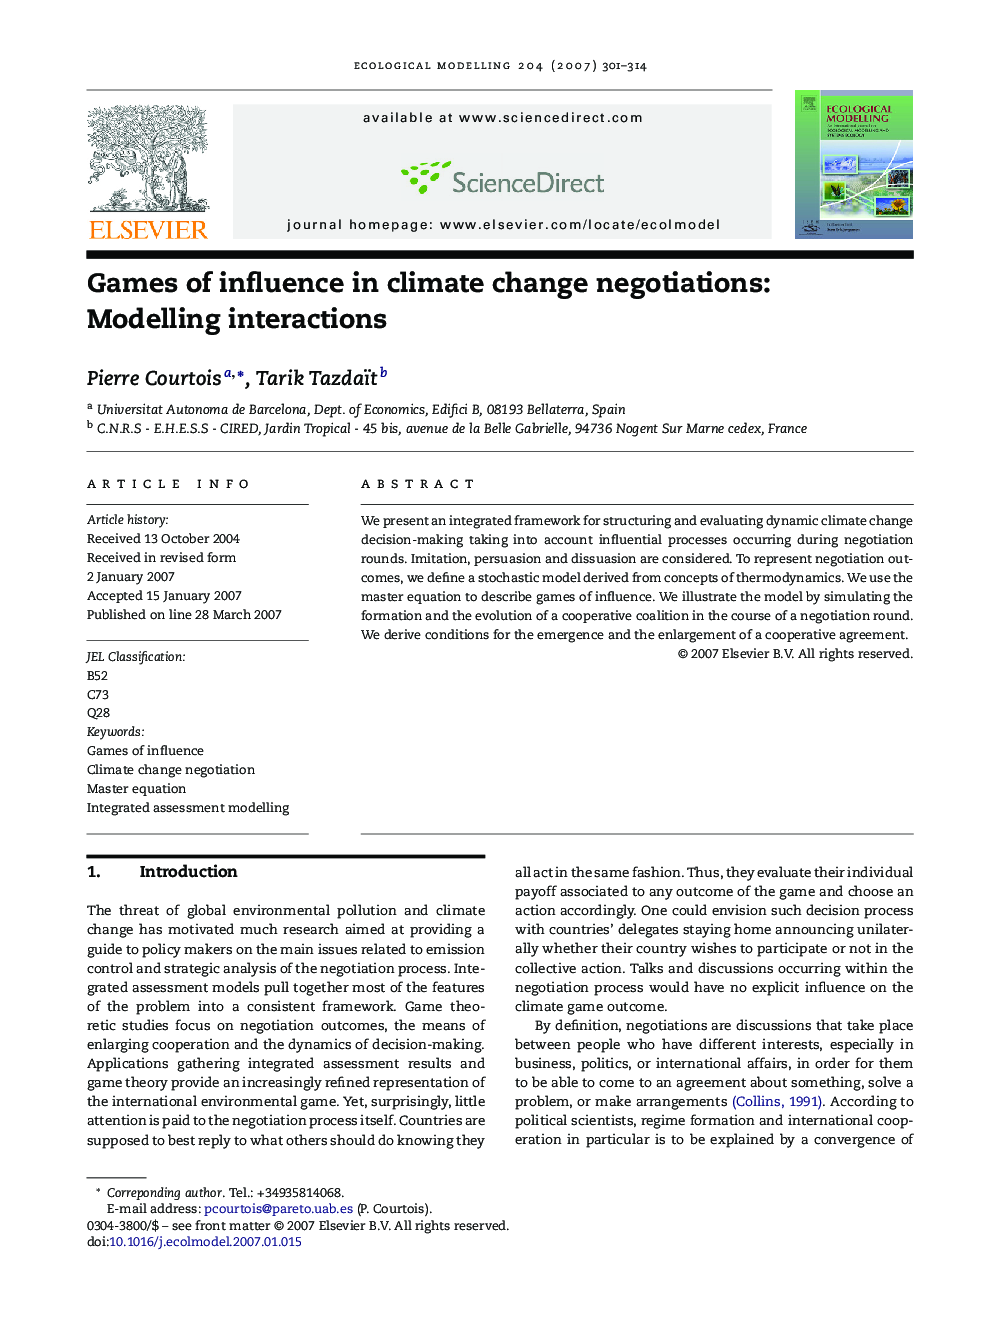 Games of influence in climate change negotiations: Modelling interactions